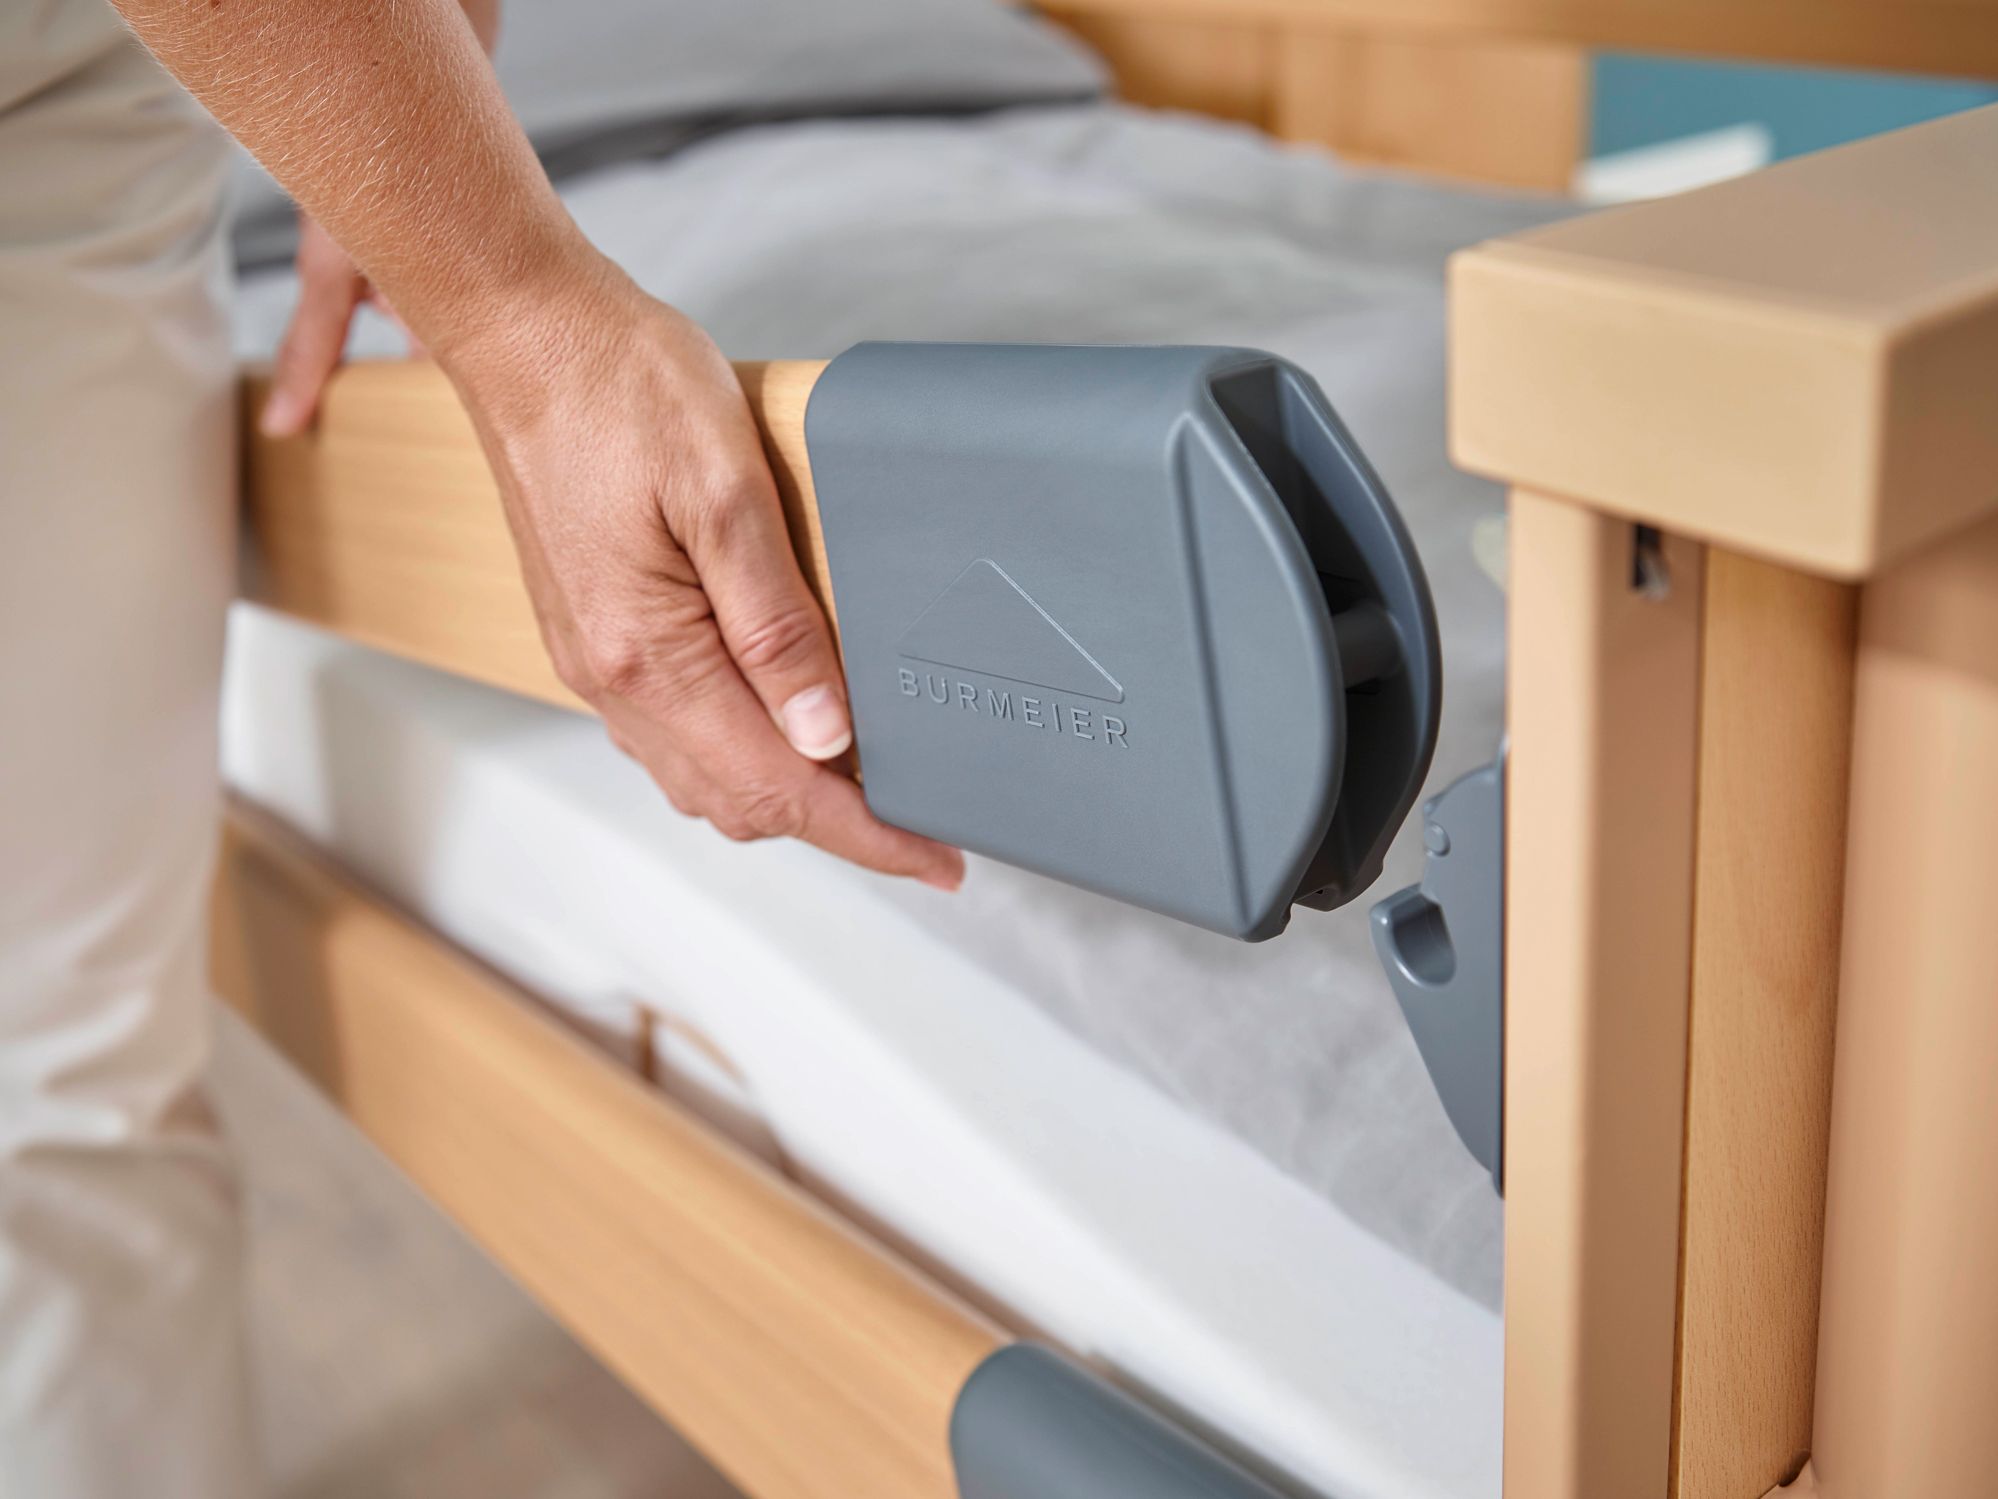 Easy Click system in the Dali care bed range